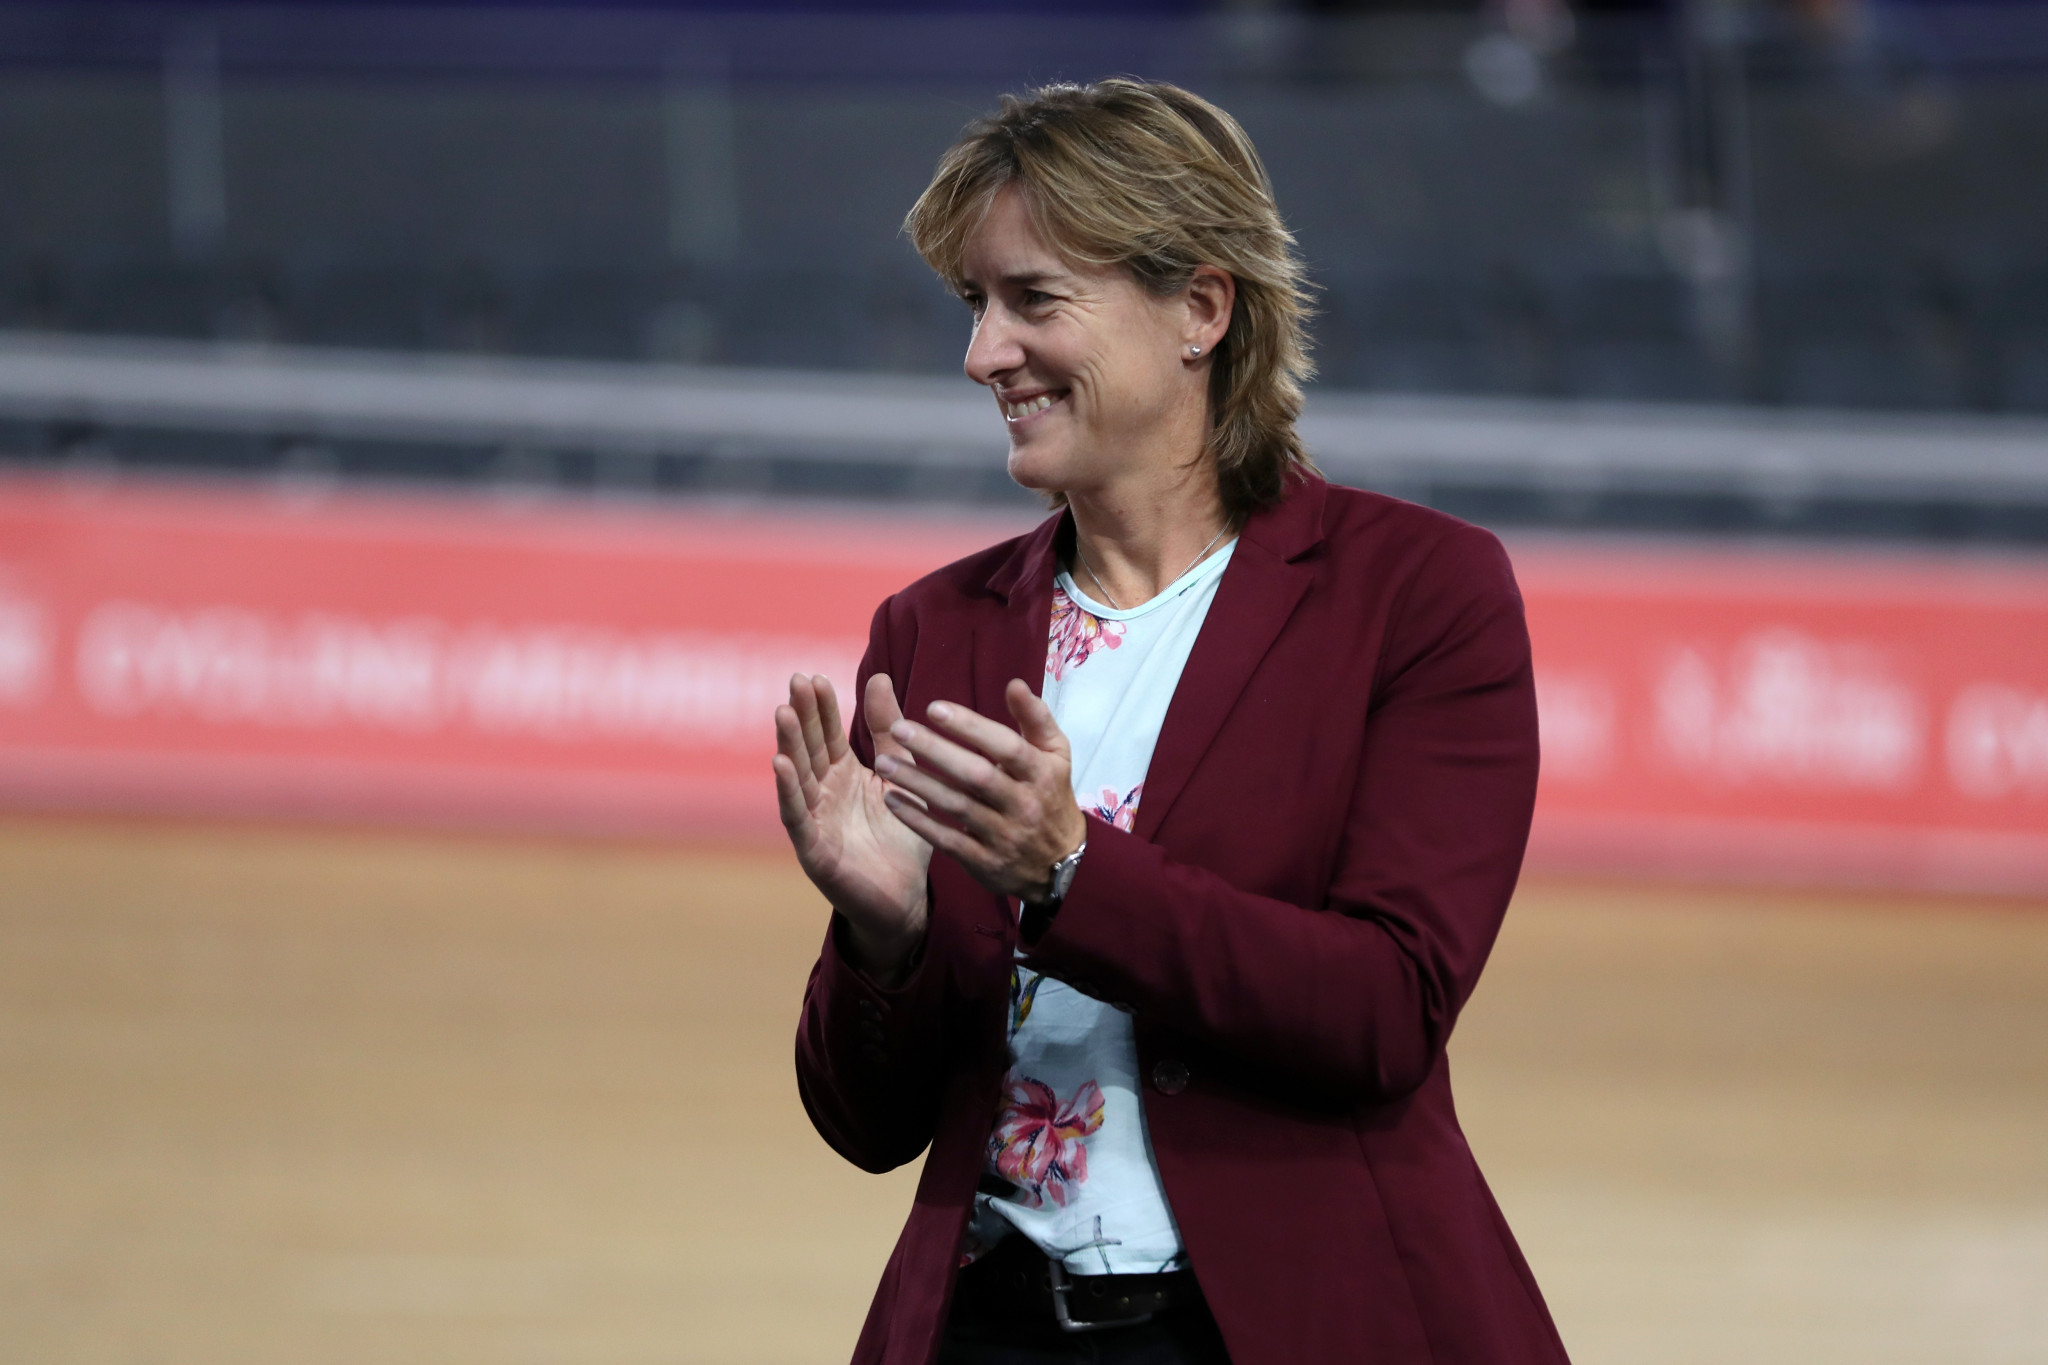 UK Sport chair Dame Katherine Grainger believes it might be time to have a "fresh look" at bidding processes for the Games ©Getty Images